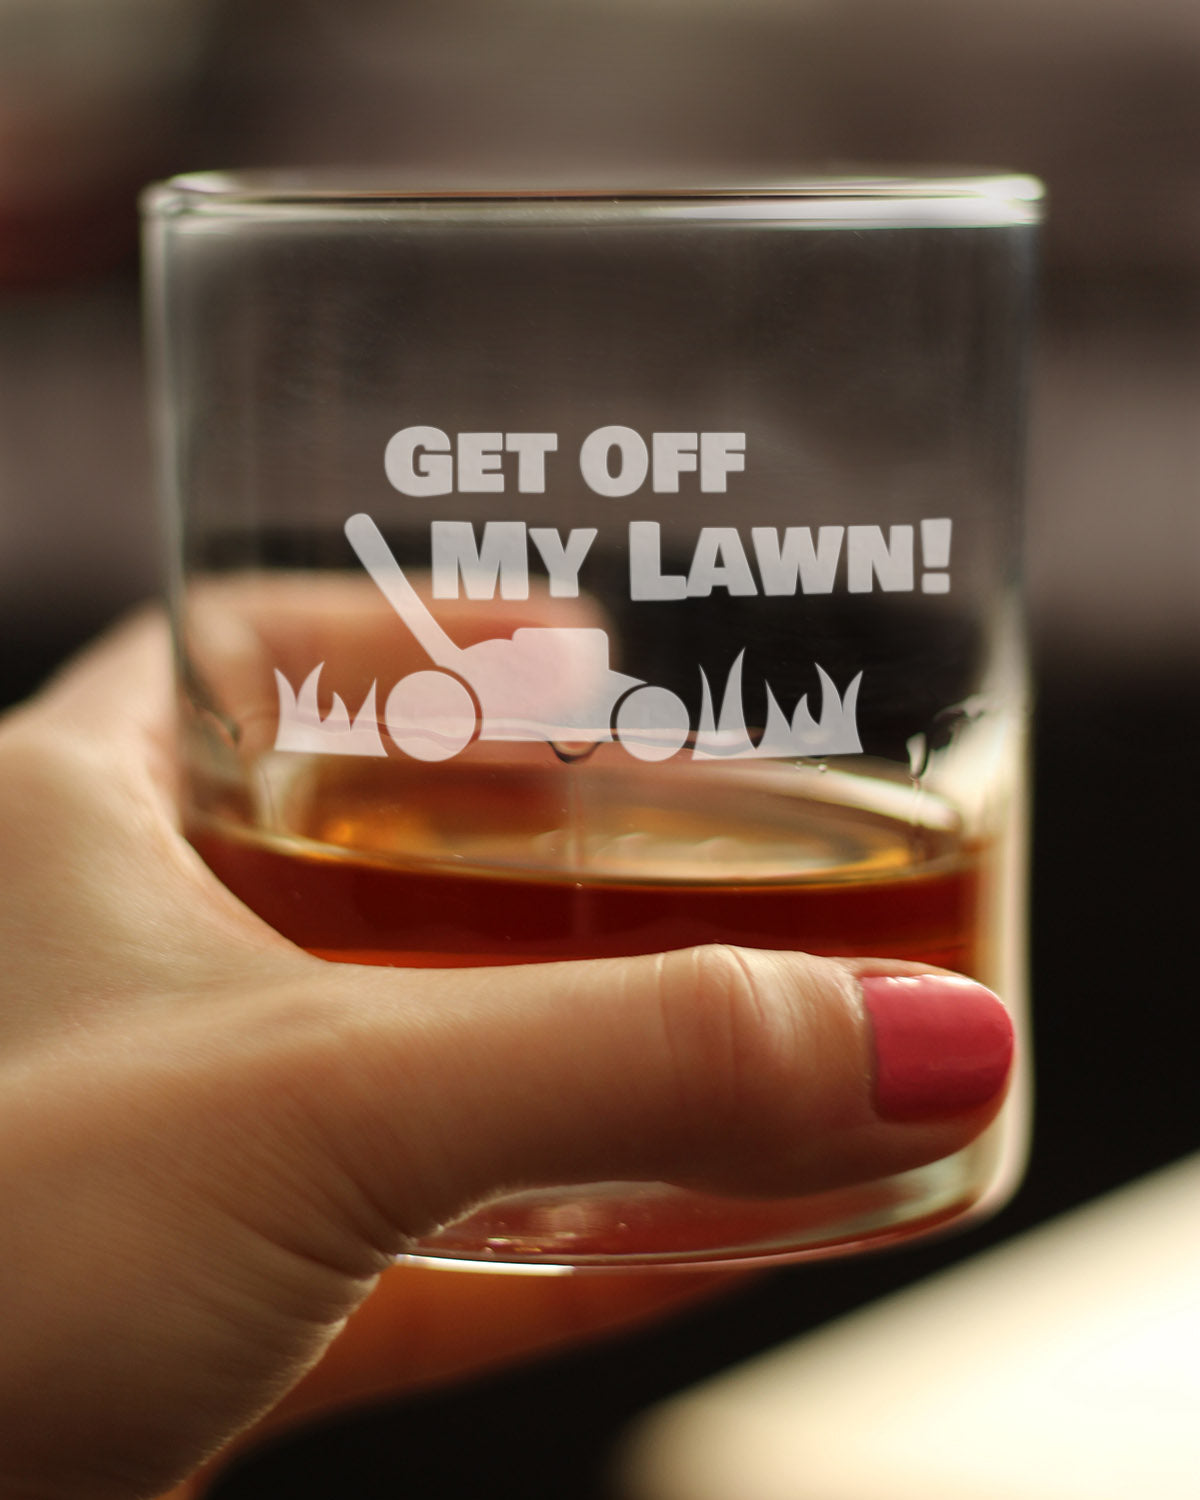 Get Off My Lawn - Whiskey Rocks Glass - Funny Birthday Gifts for Women and Men Over the Hill - 10.25 oz